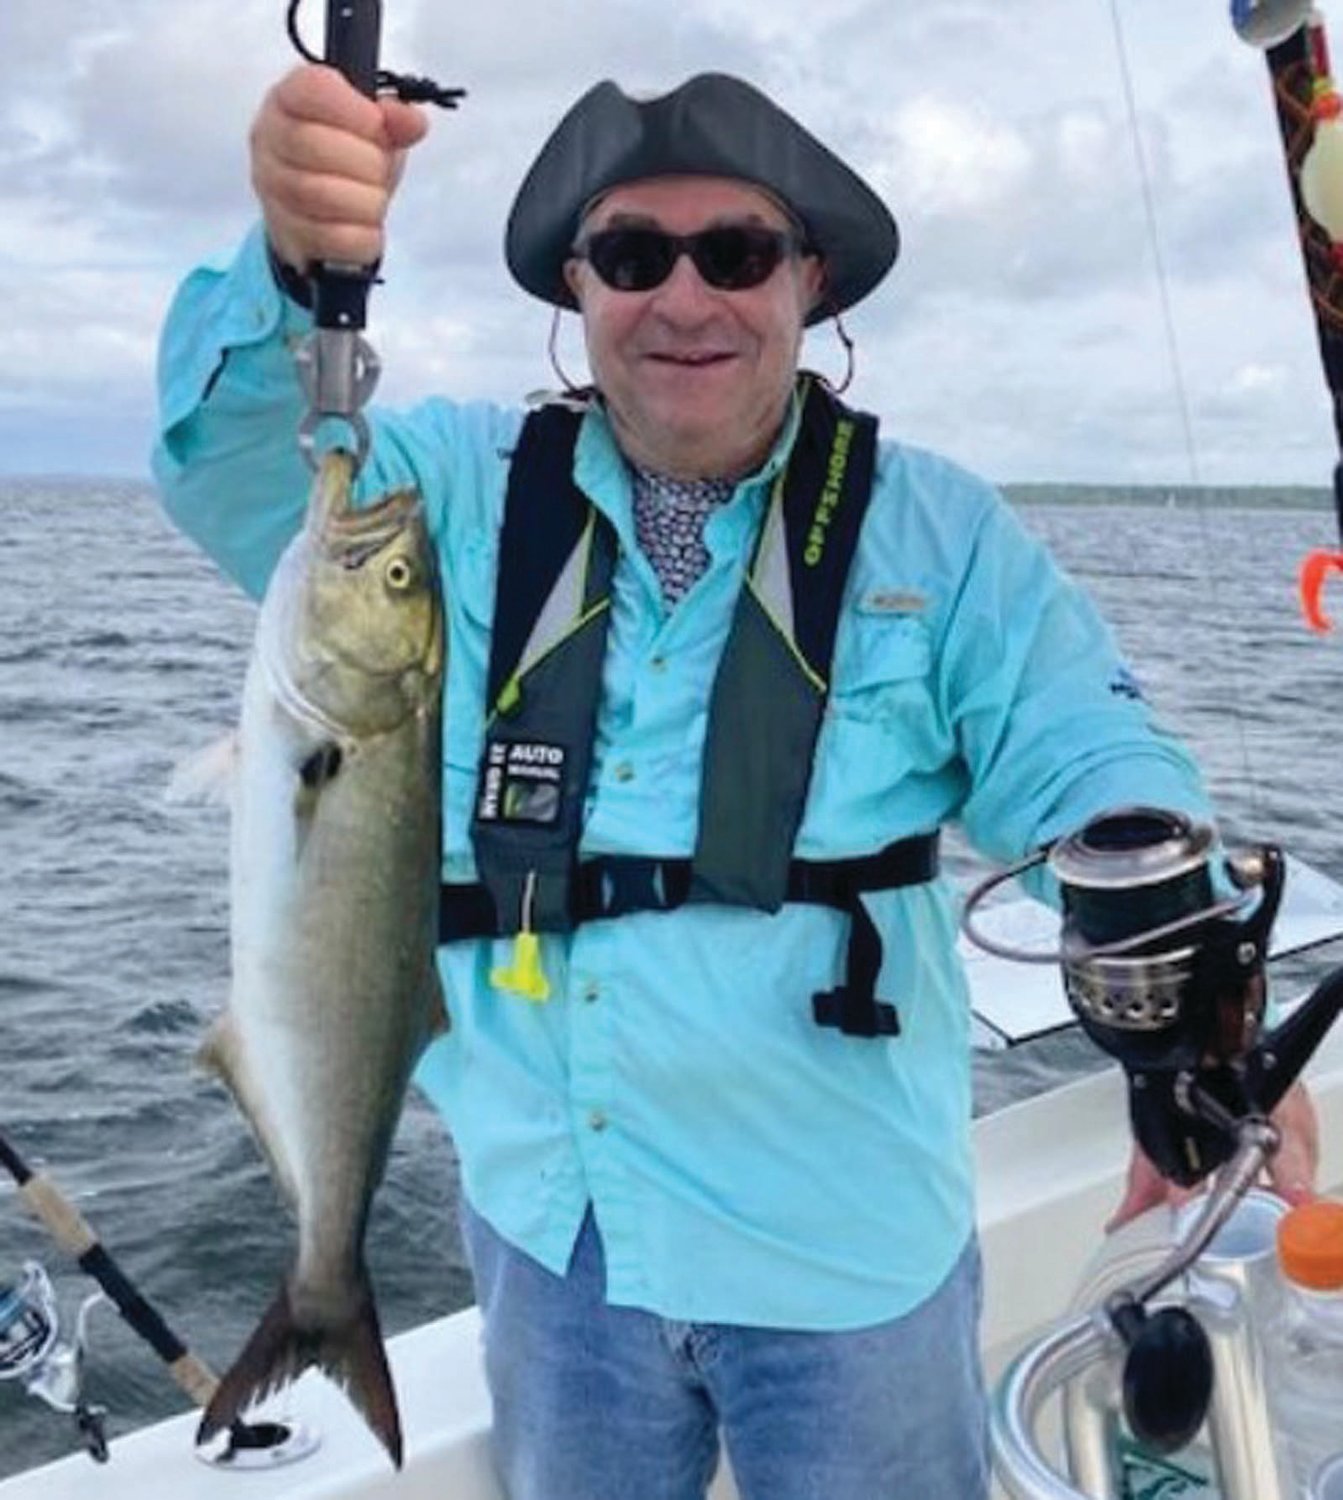 BLUEFISH BLITZ:   This week angler Bruce Kaercher formerly of RI now Arkansas caught bluefish during surface feeding frenzies. Bluefish are in the Bay in greater abundance than in recent years.